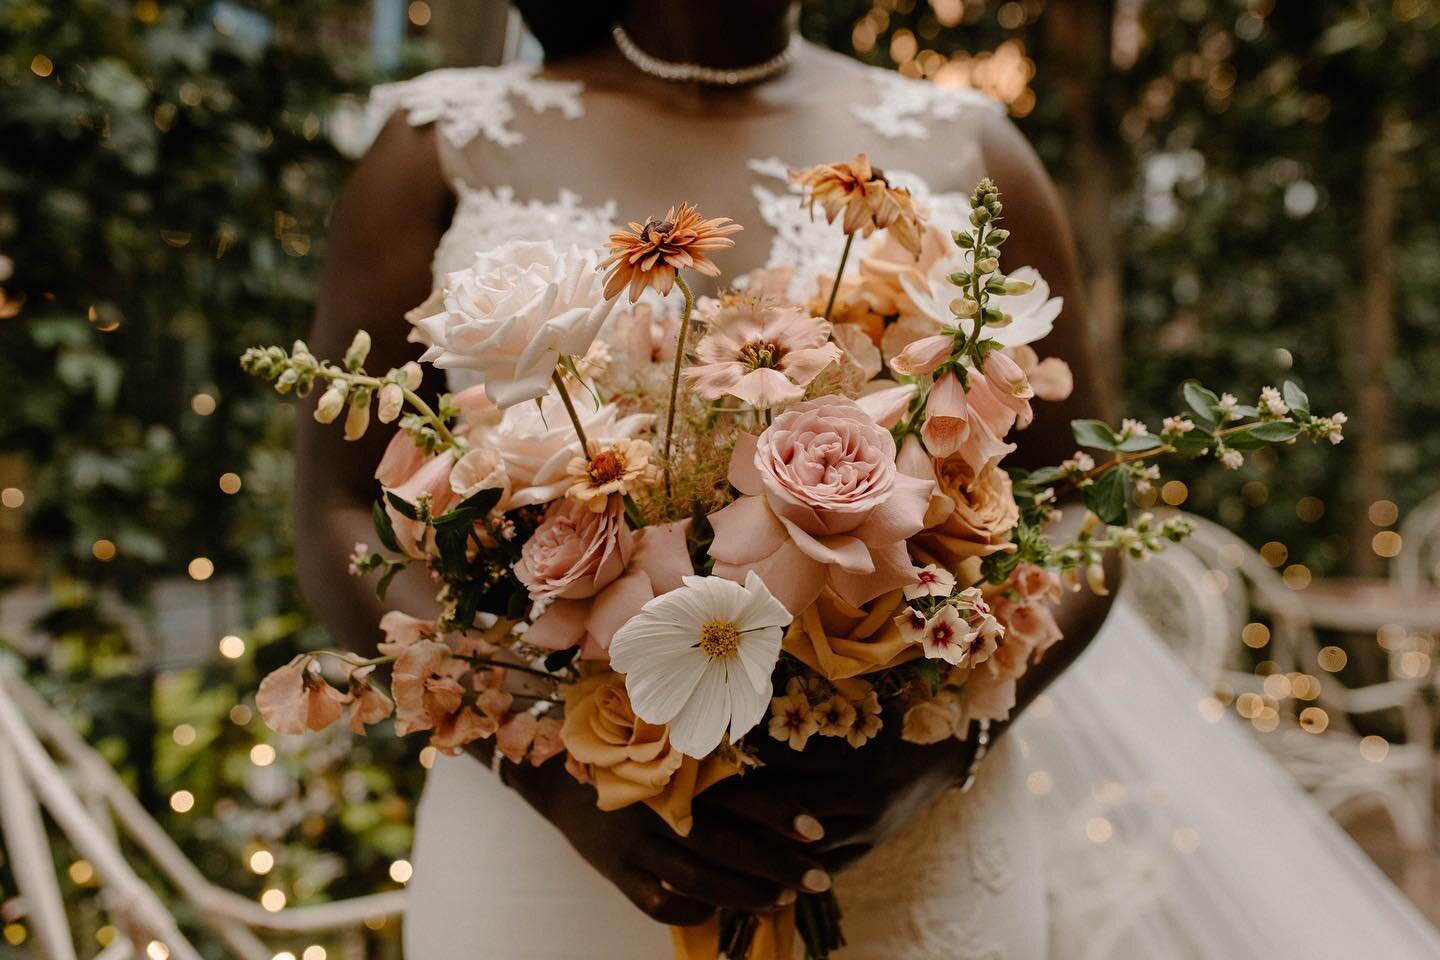 One thing about me - I love me some flowers! I love watching my florist friends create some magic. Can&rsquo;t wait to have the talented queen that is Joanne, make magic for my friends&rsquo; wedding this weekend!

Planning: @vowandco &bull; Day Of: 